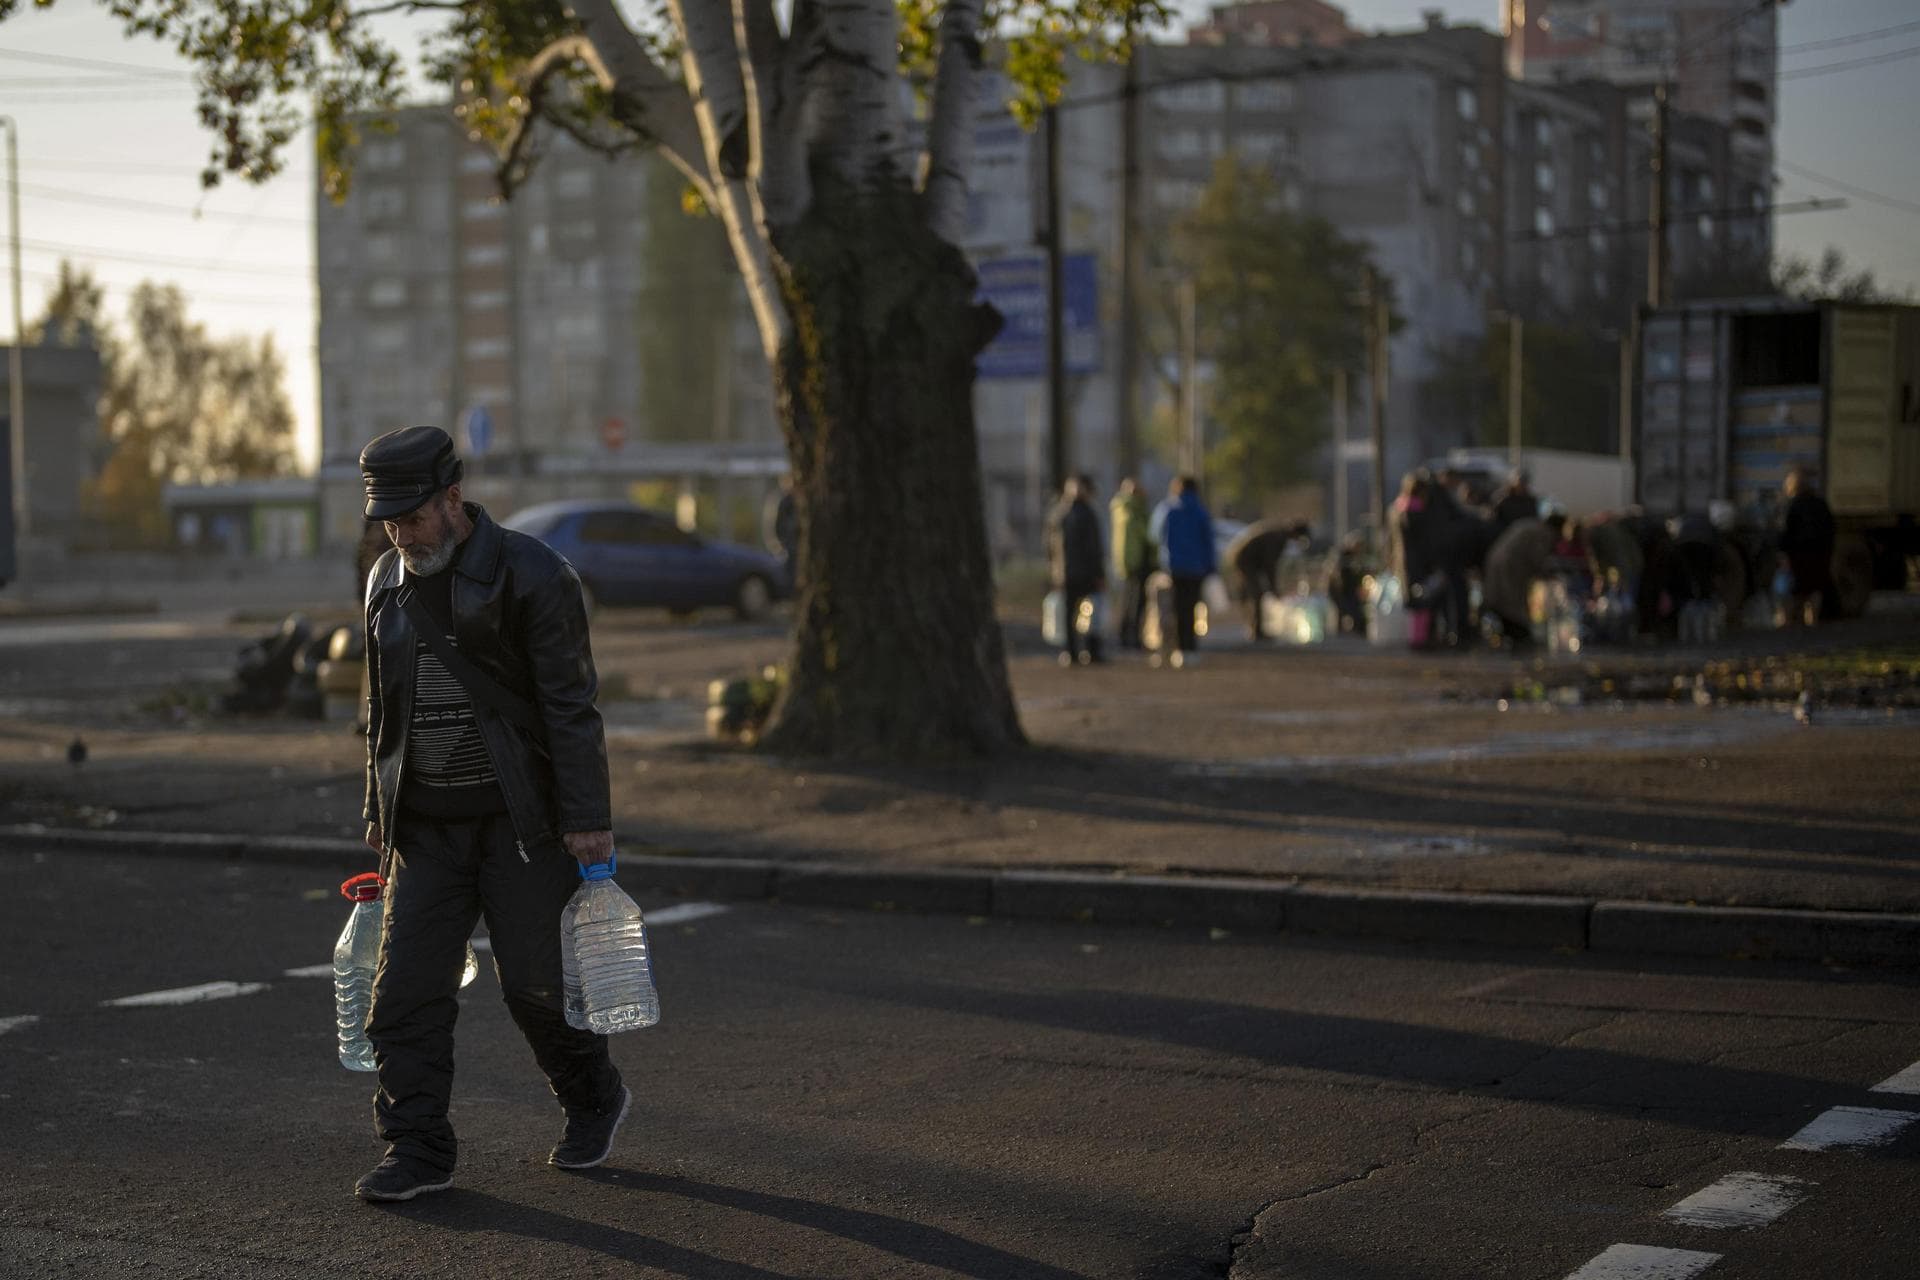 A man carries plastic bottles after refilling them in a tank, in the center of Mykolaiv